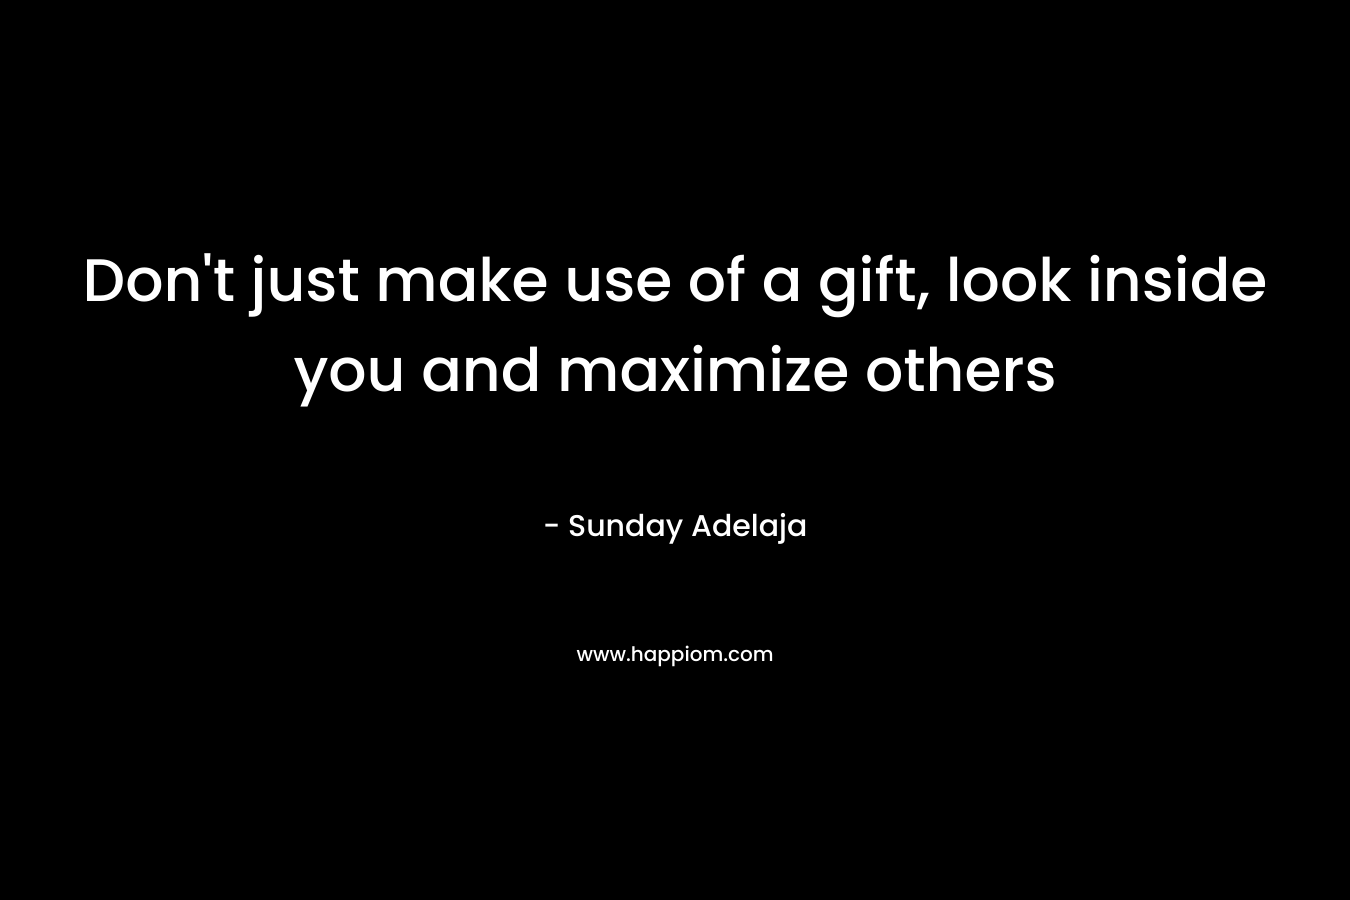 Don't just make use of a gift, look inside you and maximize others